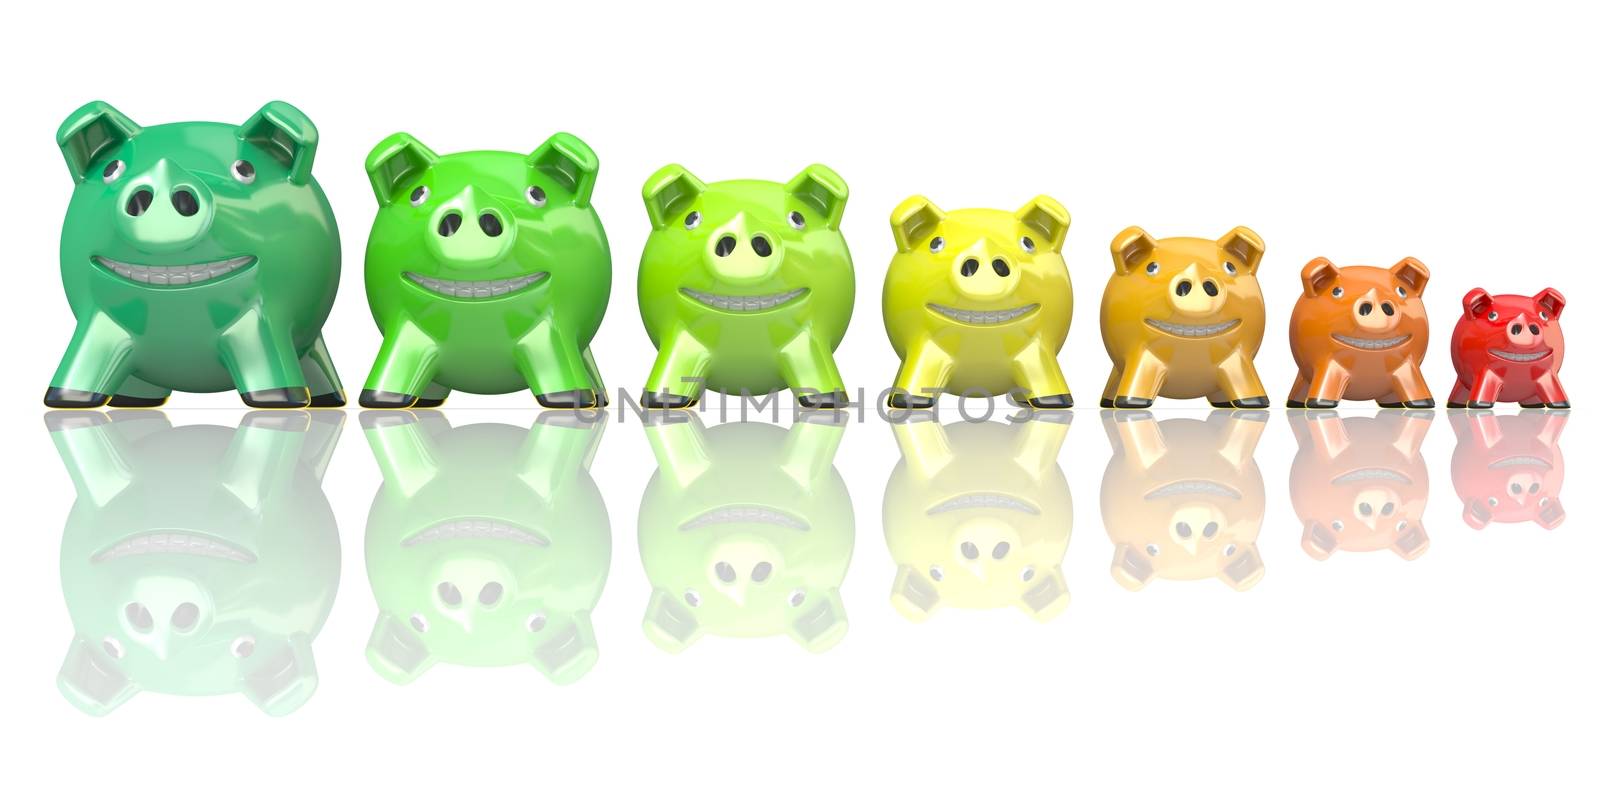 Saving energy consumption concept made of piggy banks. 3D render illustration isolated on white background